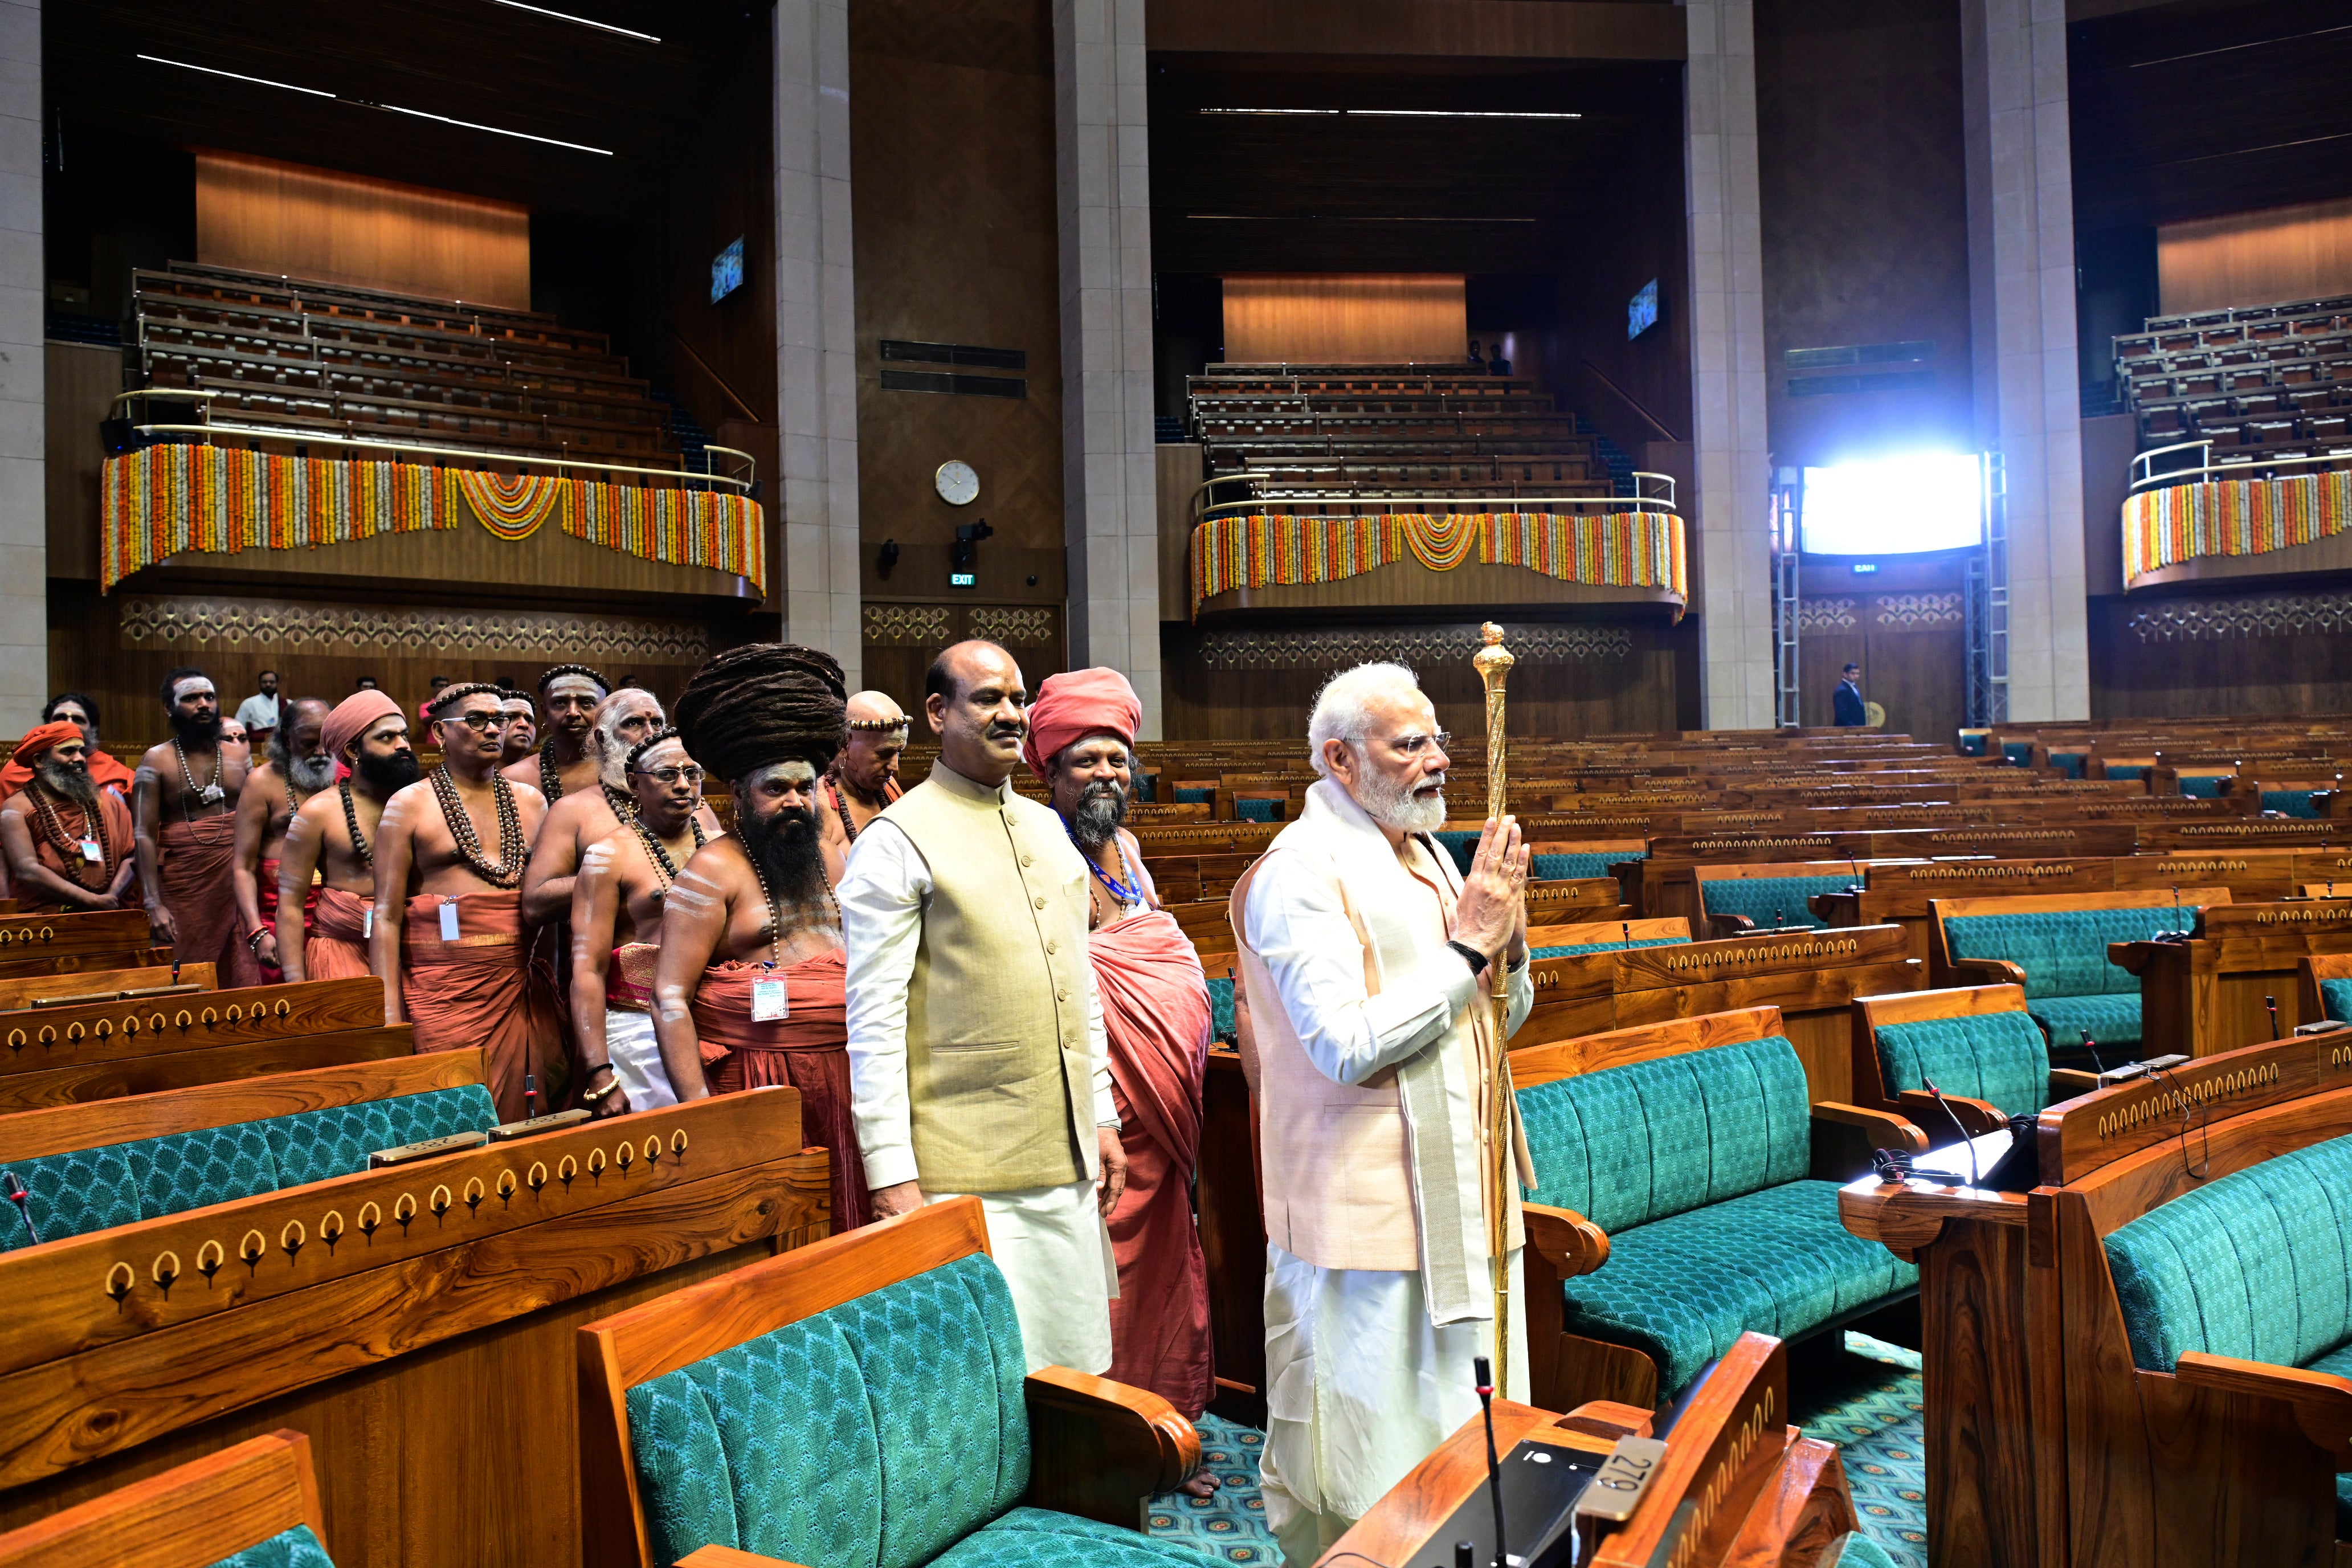 Narendra Modi carries the royal golden sceptre to be installed near the speaker’s chair in the new parliament building